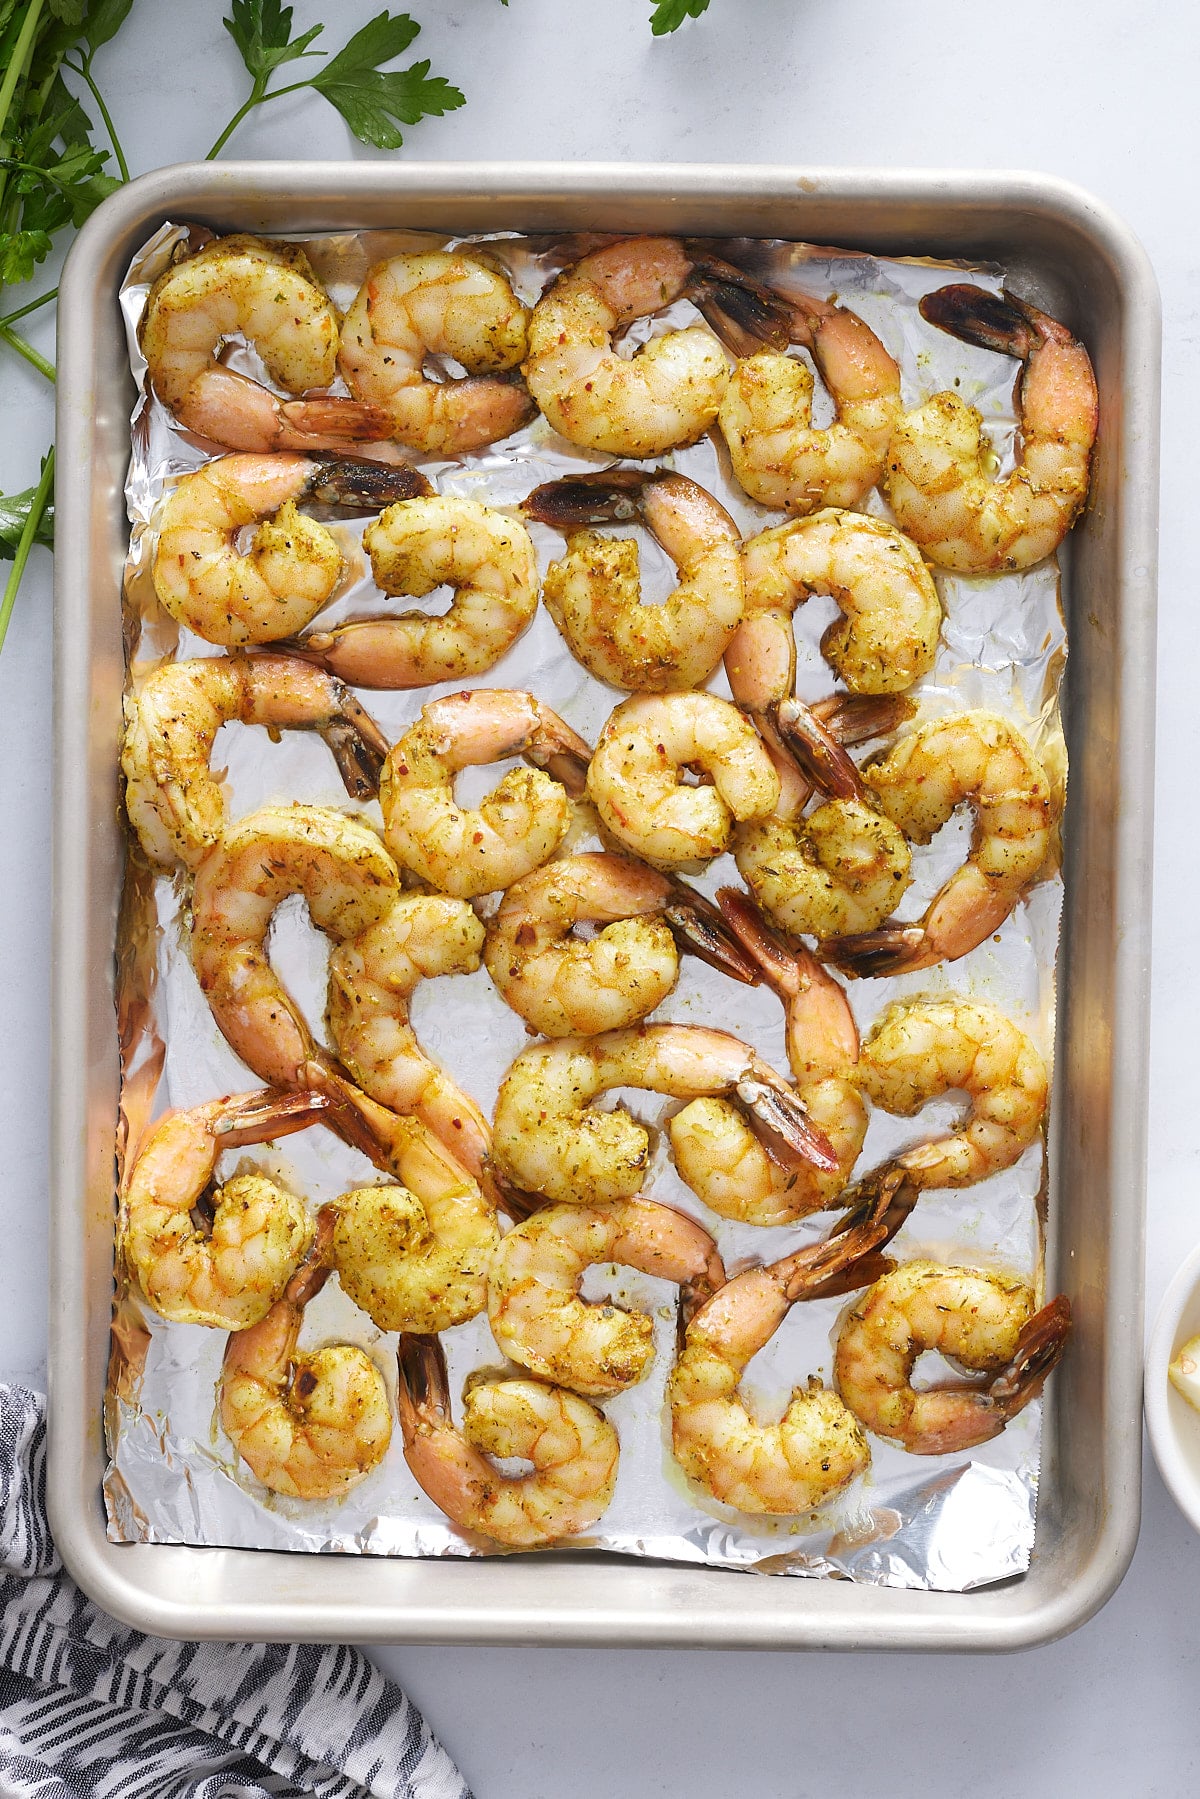 cooked shrimp on a baking sheet